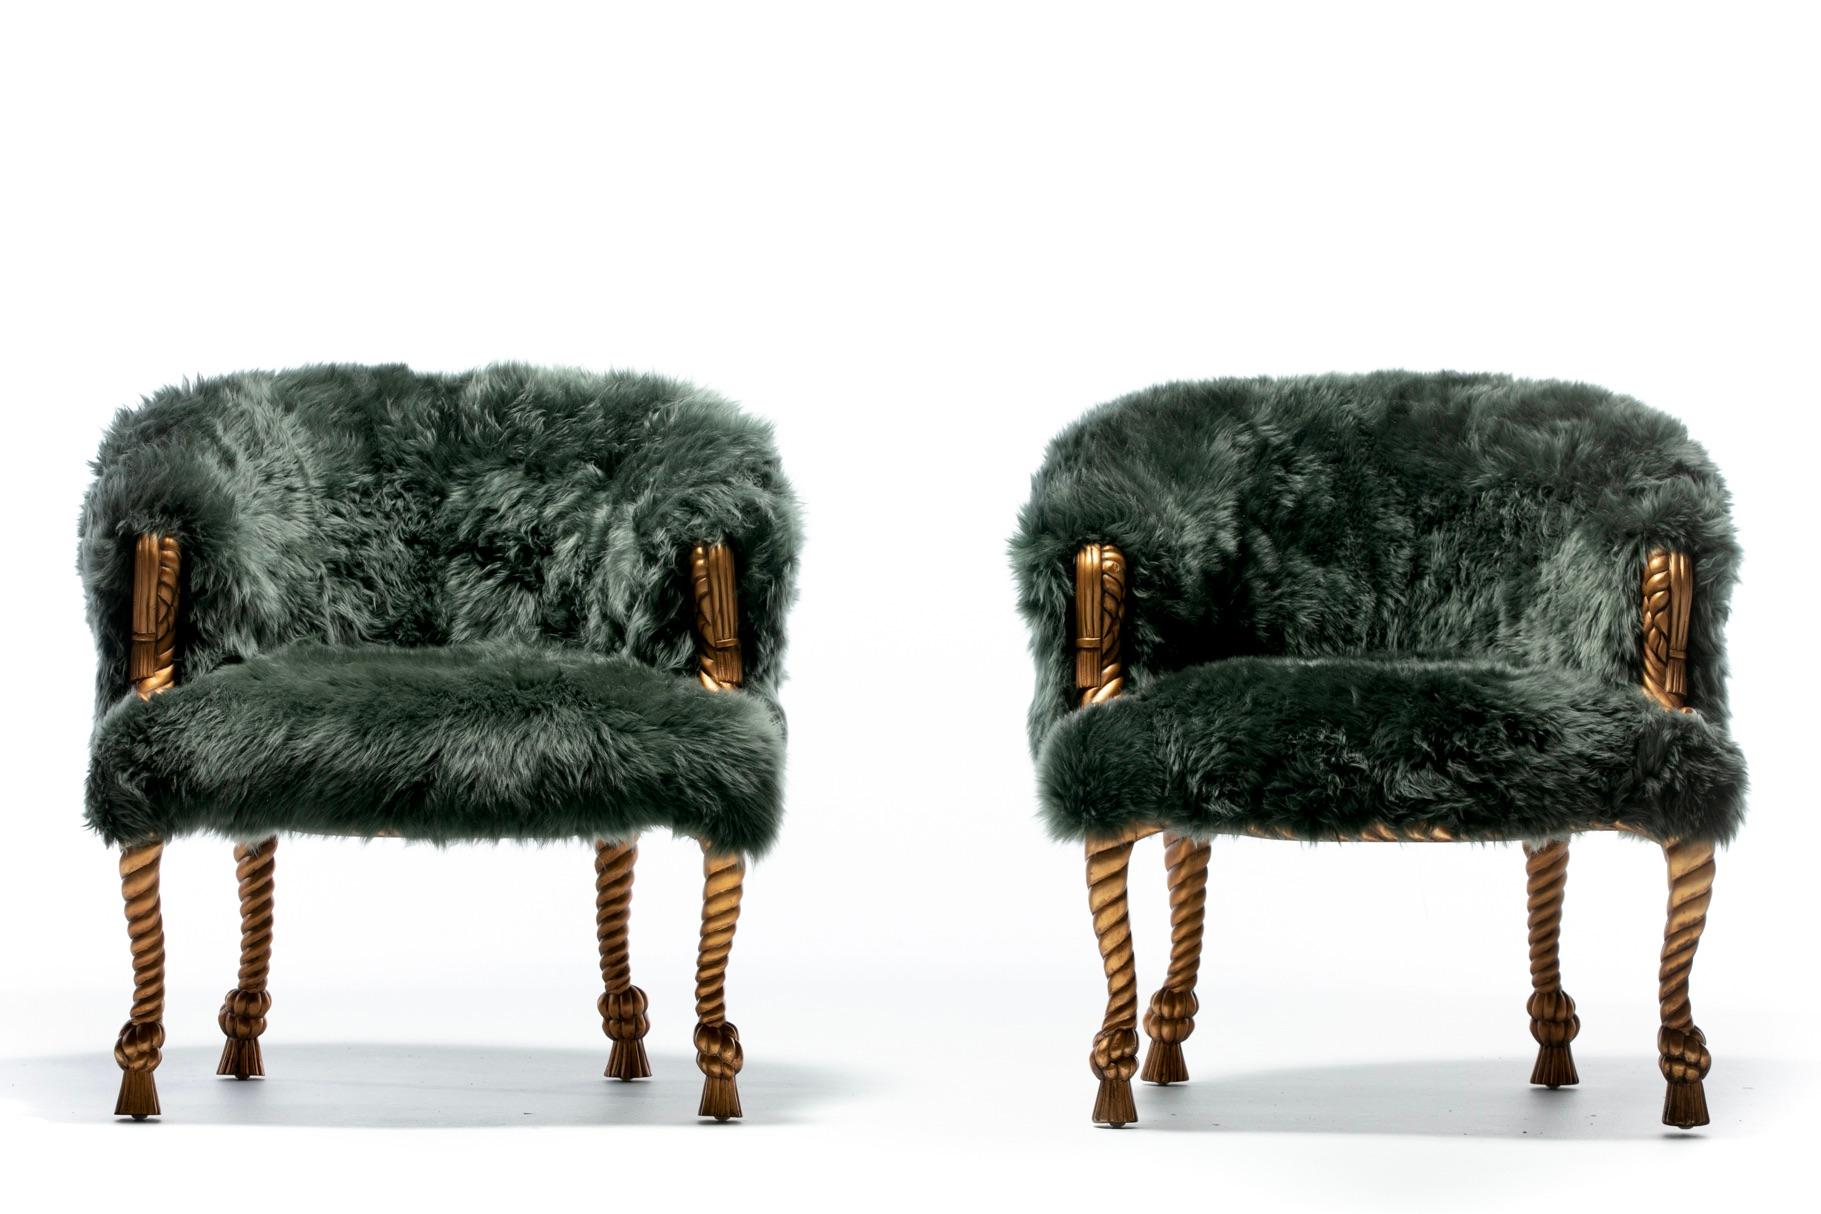 Unapologetically upscale and glamorous pair of gilt rope and tassel Napoleon III style chairs freshly upholstered in hand sewn emerald sheepskin. French. Chic. Such a killer combo. Like gold with emeralds each surface brings out the best in the